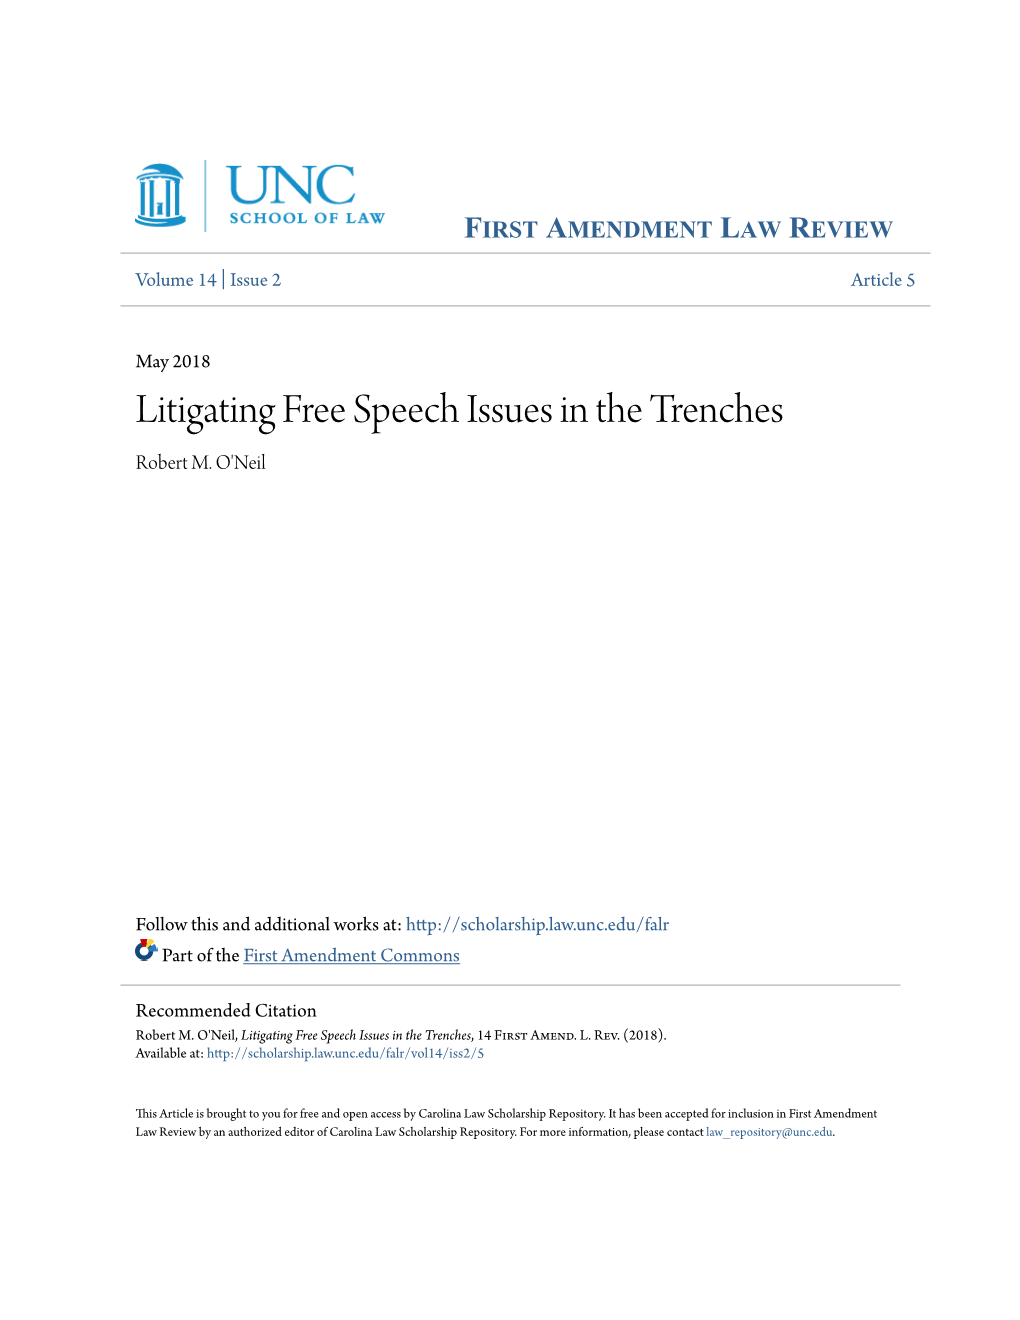 Litigating Free Speech Issues in the Trenches Robert M